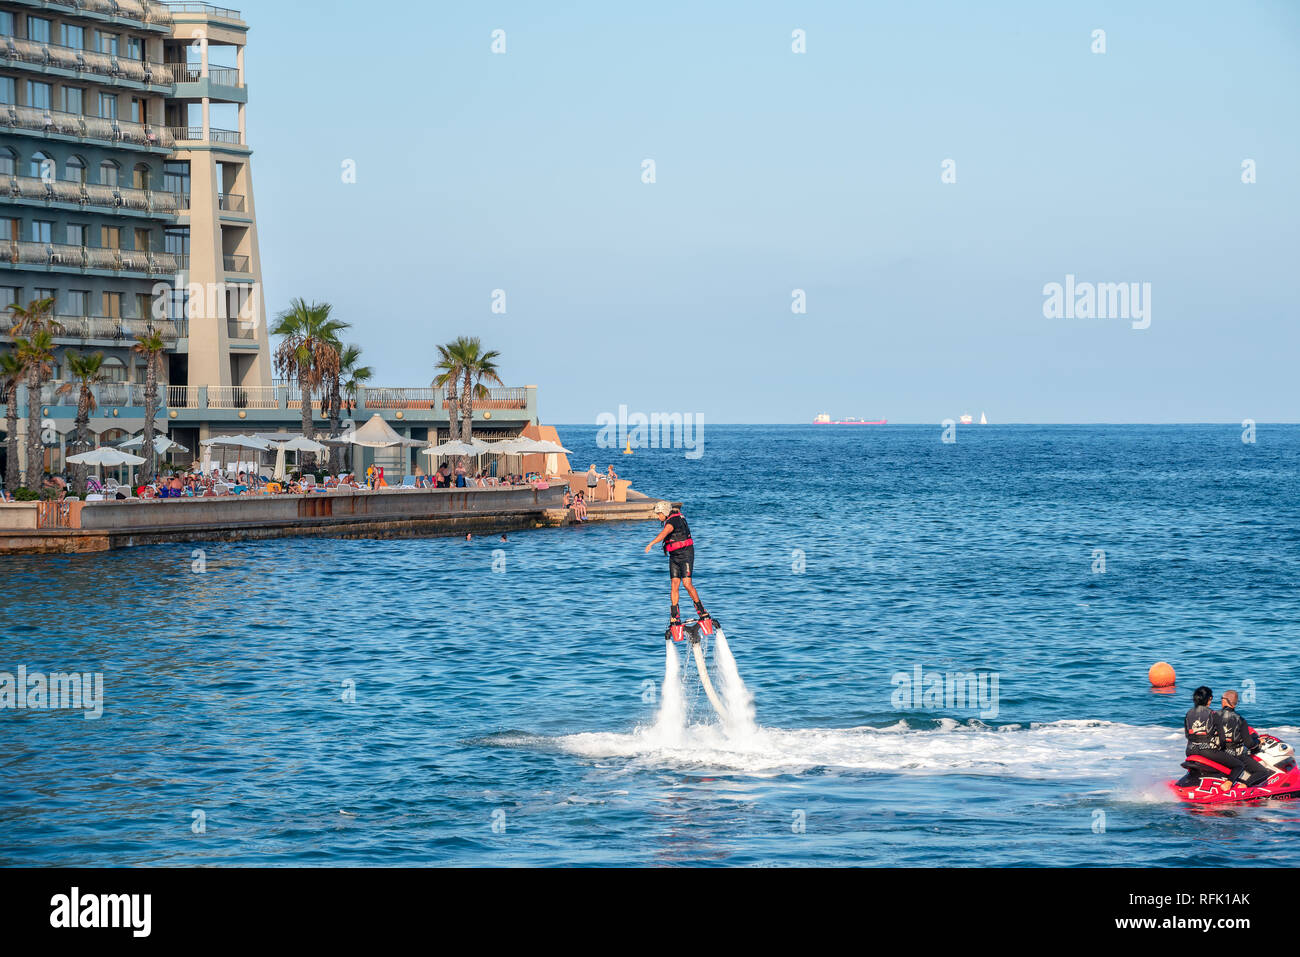 New popular type of extreme water sport called flyboard at St. Julians bay. Malta Stock Photo